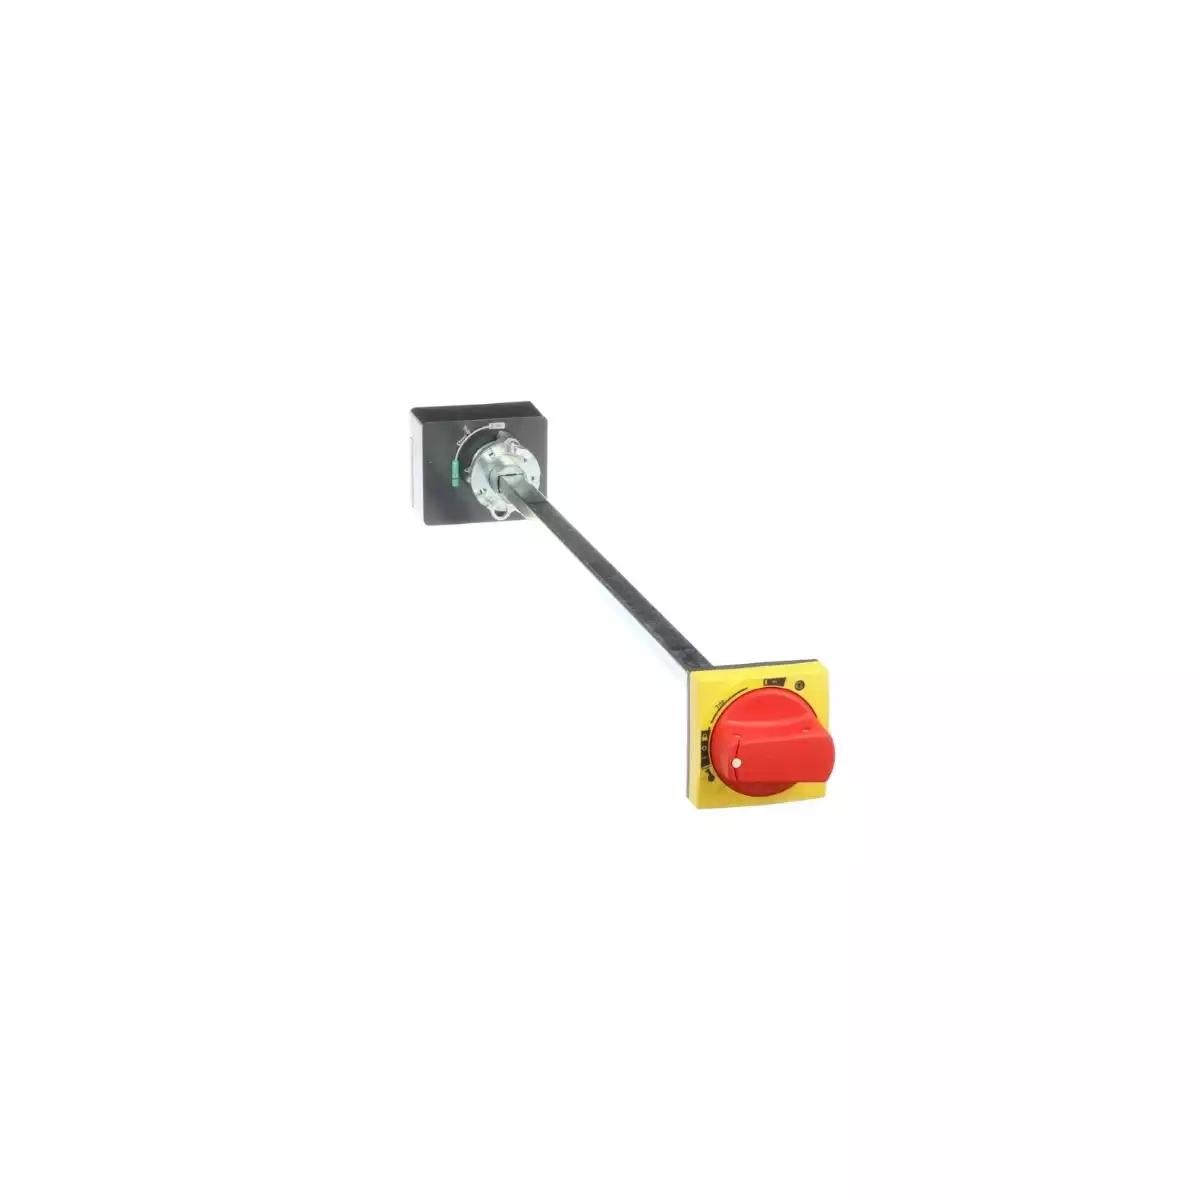 Extended rotary handle, ComPact NSXm, red handle on yellow front, shaft length 200 to 600 mm, IP54